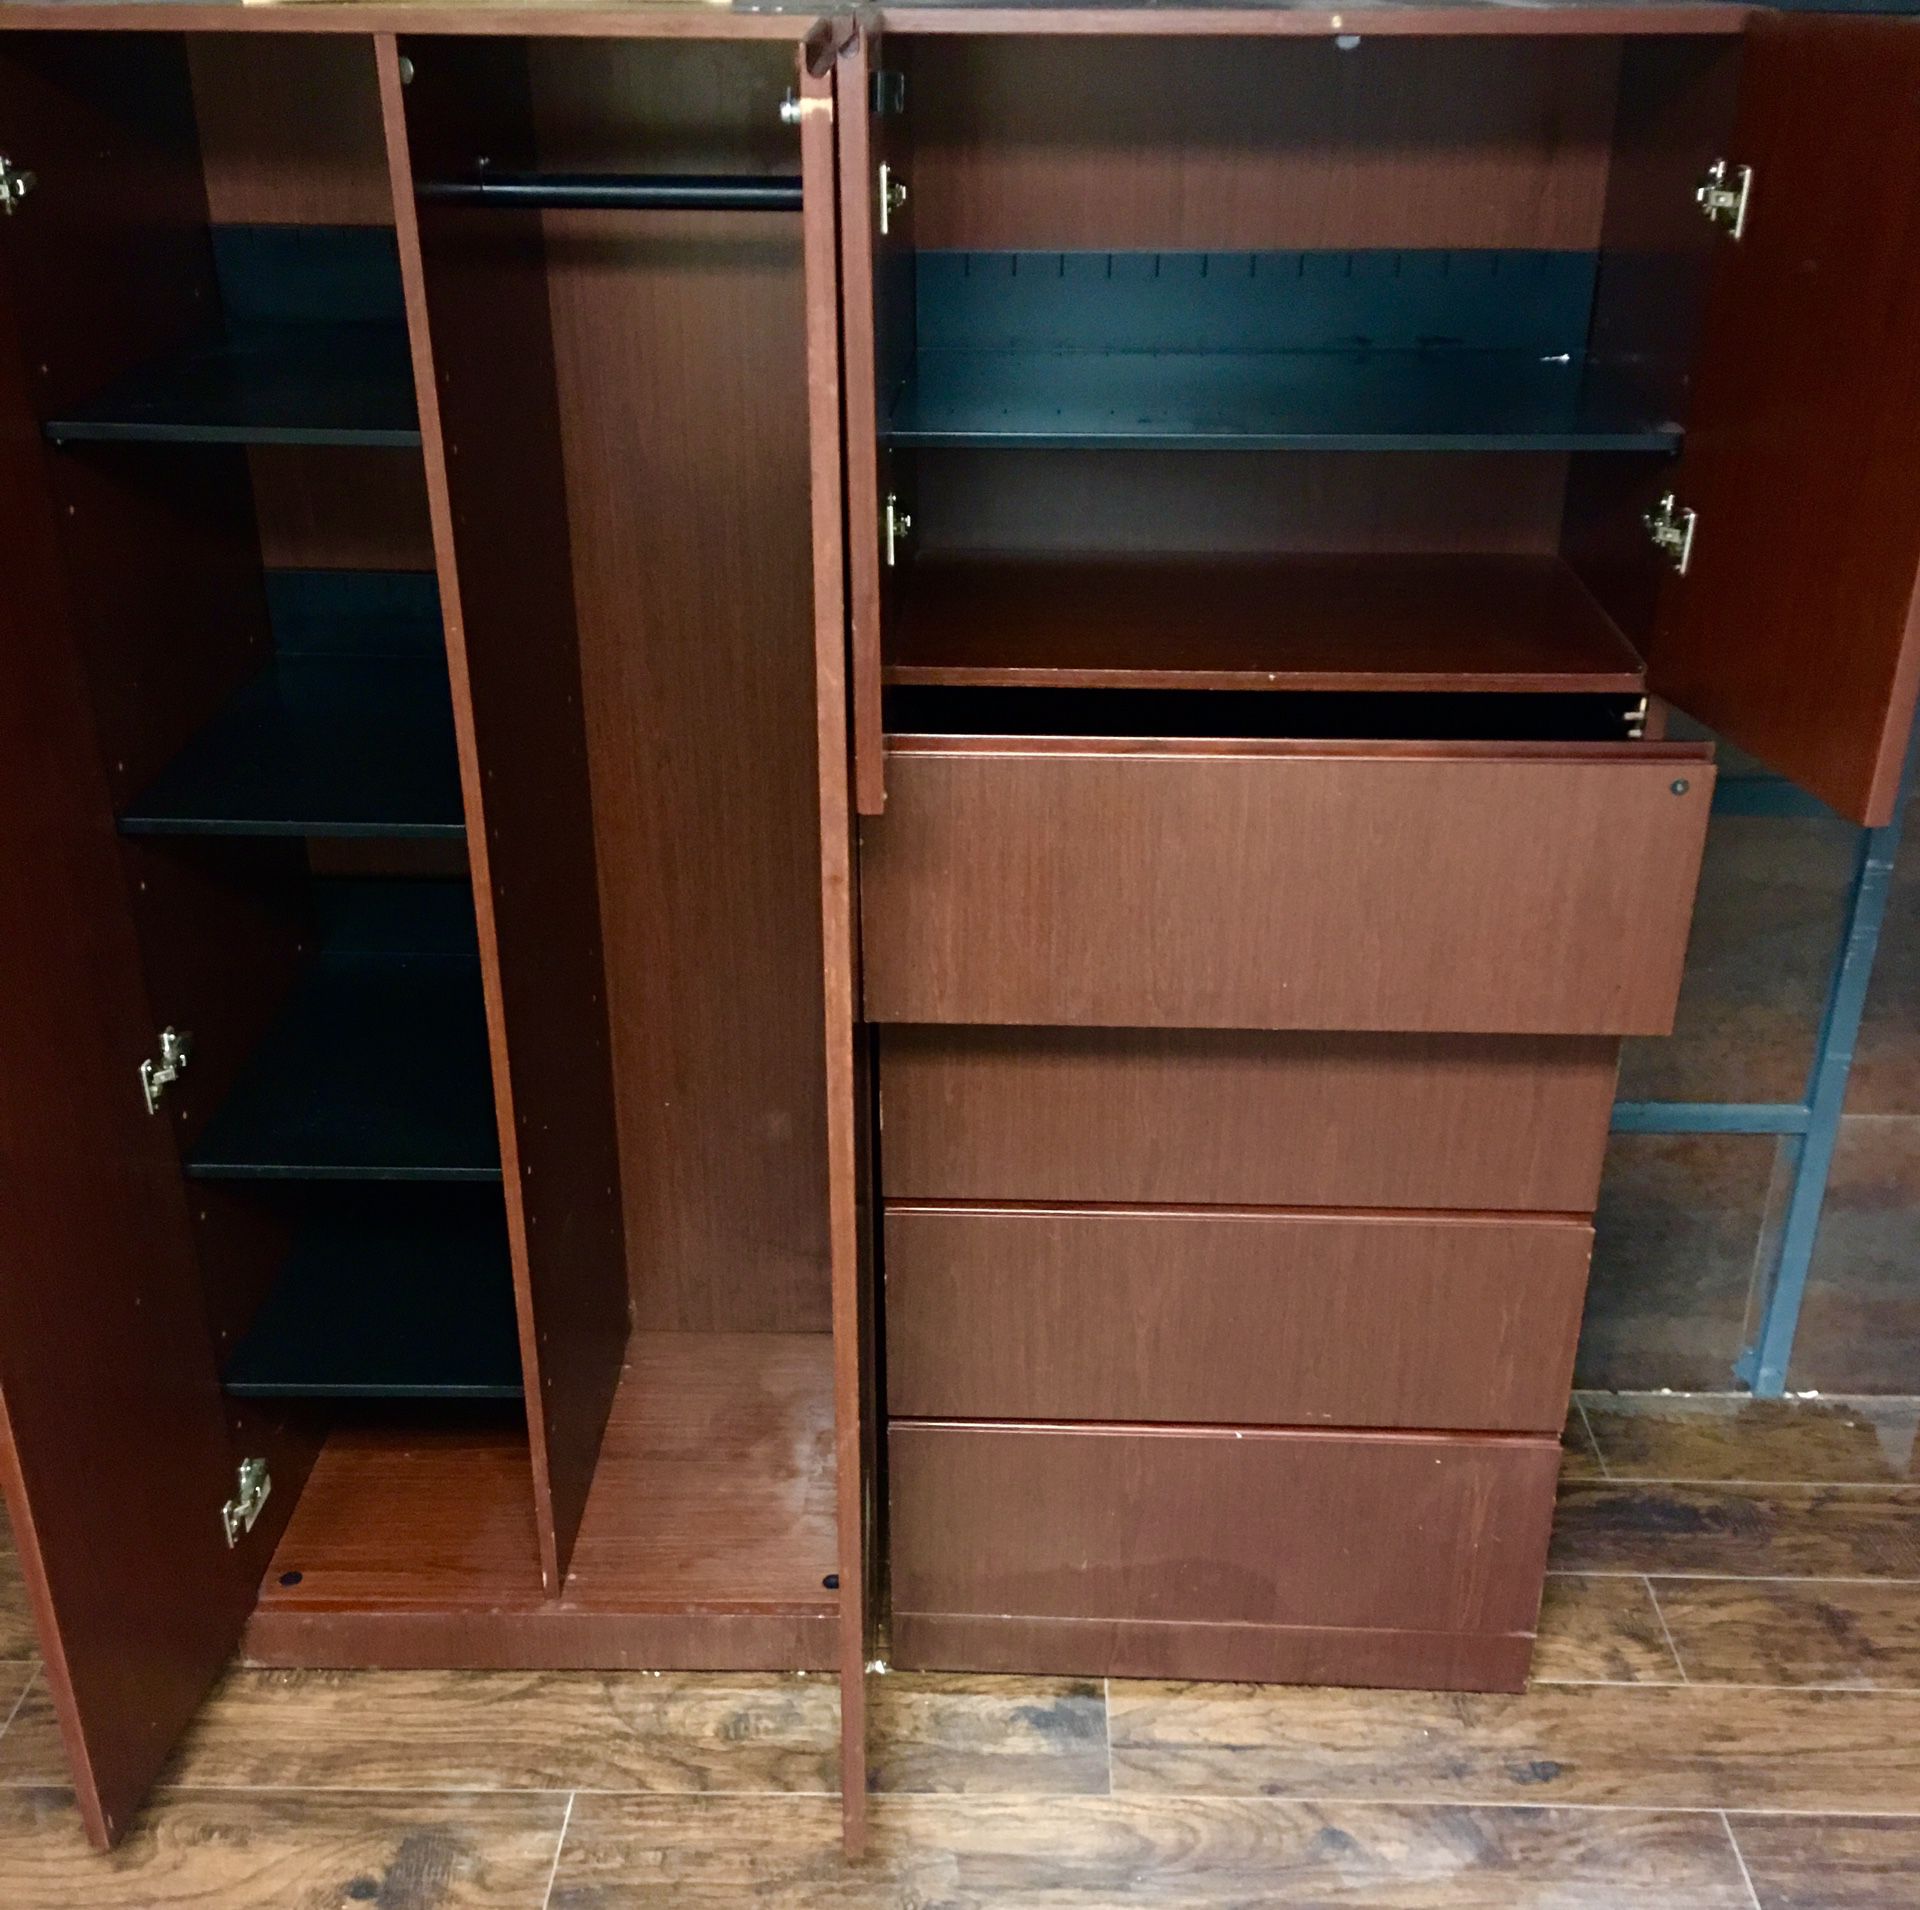 OFFICE or Home Storage/ Wardrobe / Filing CABINETS IN CHERRY WOOD & Cherry Wood Veneer BY KNOLL furnitur